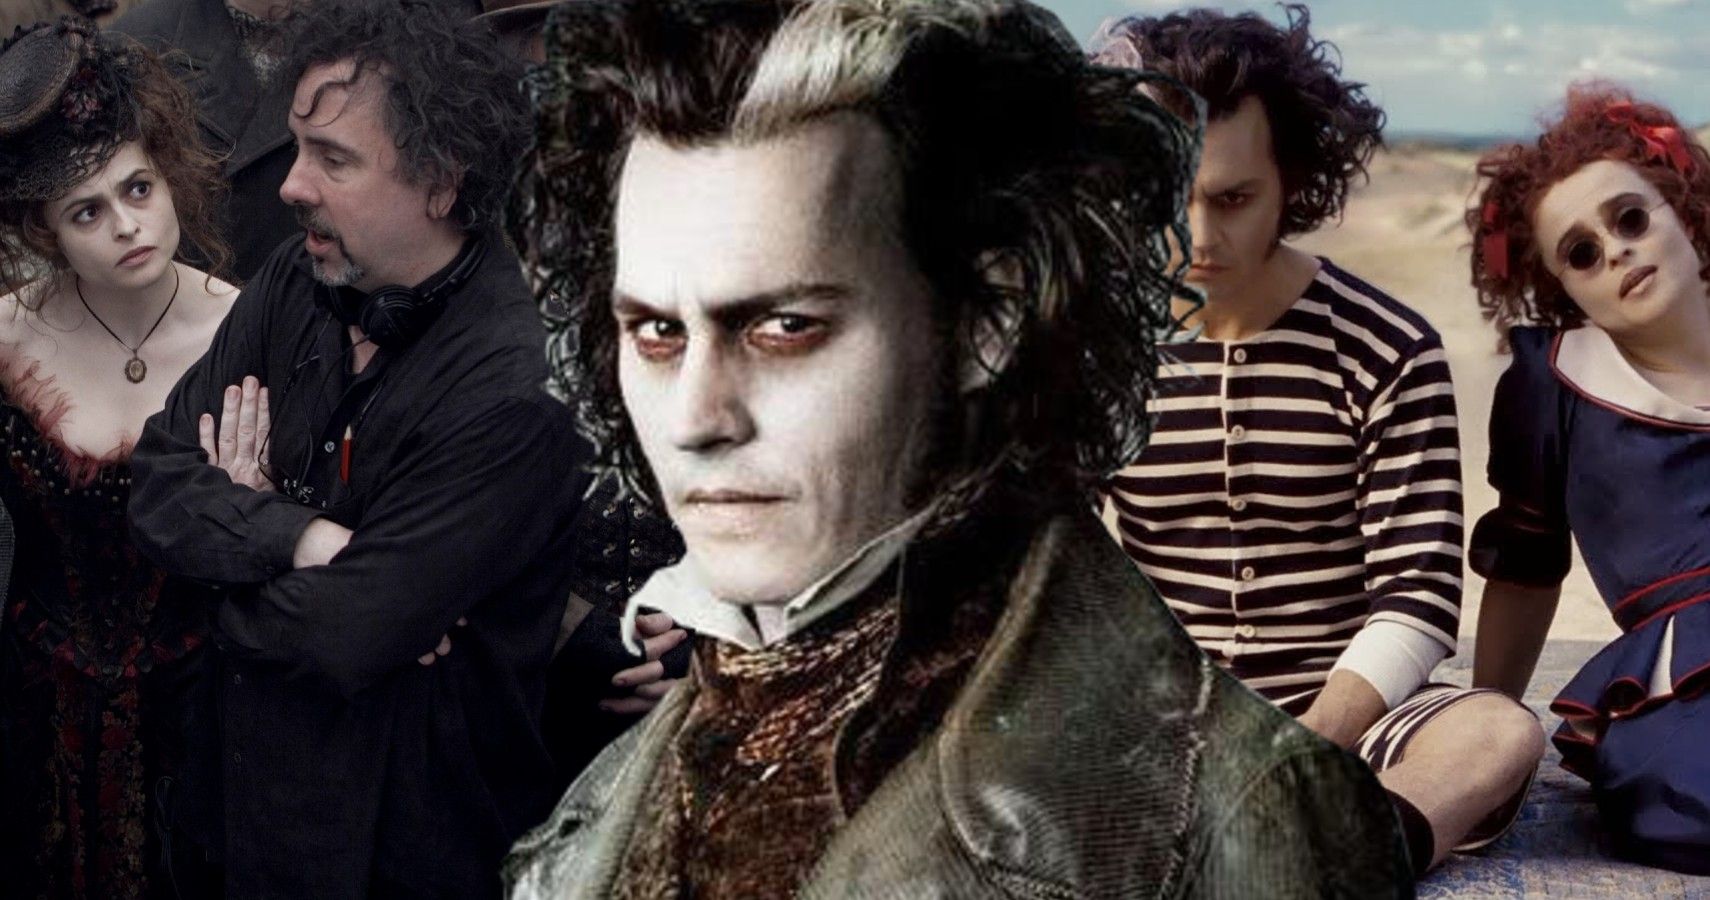 Sweeney Todd Review by Soap2Day